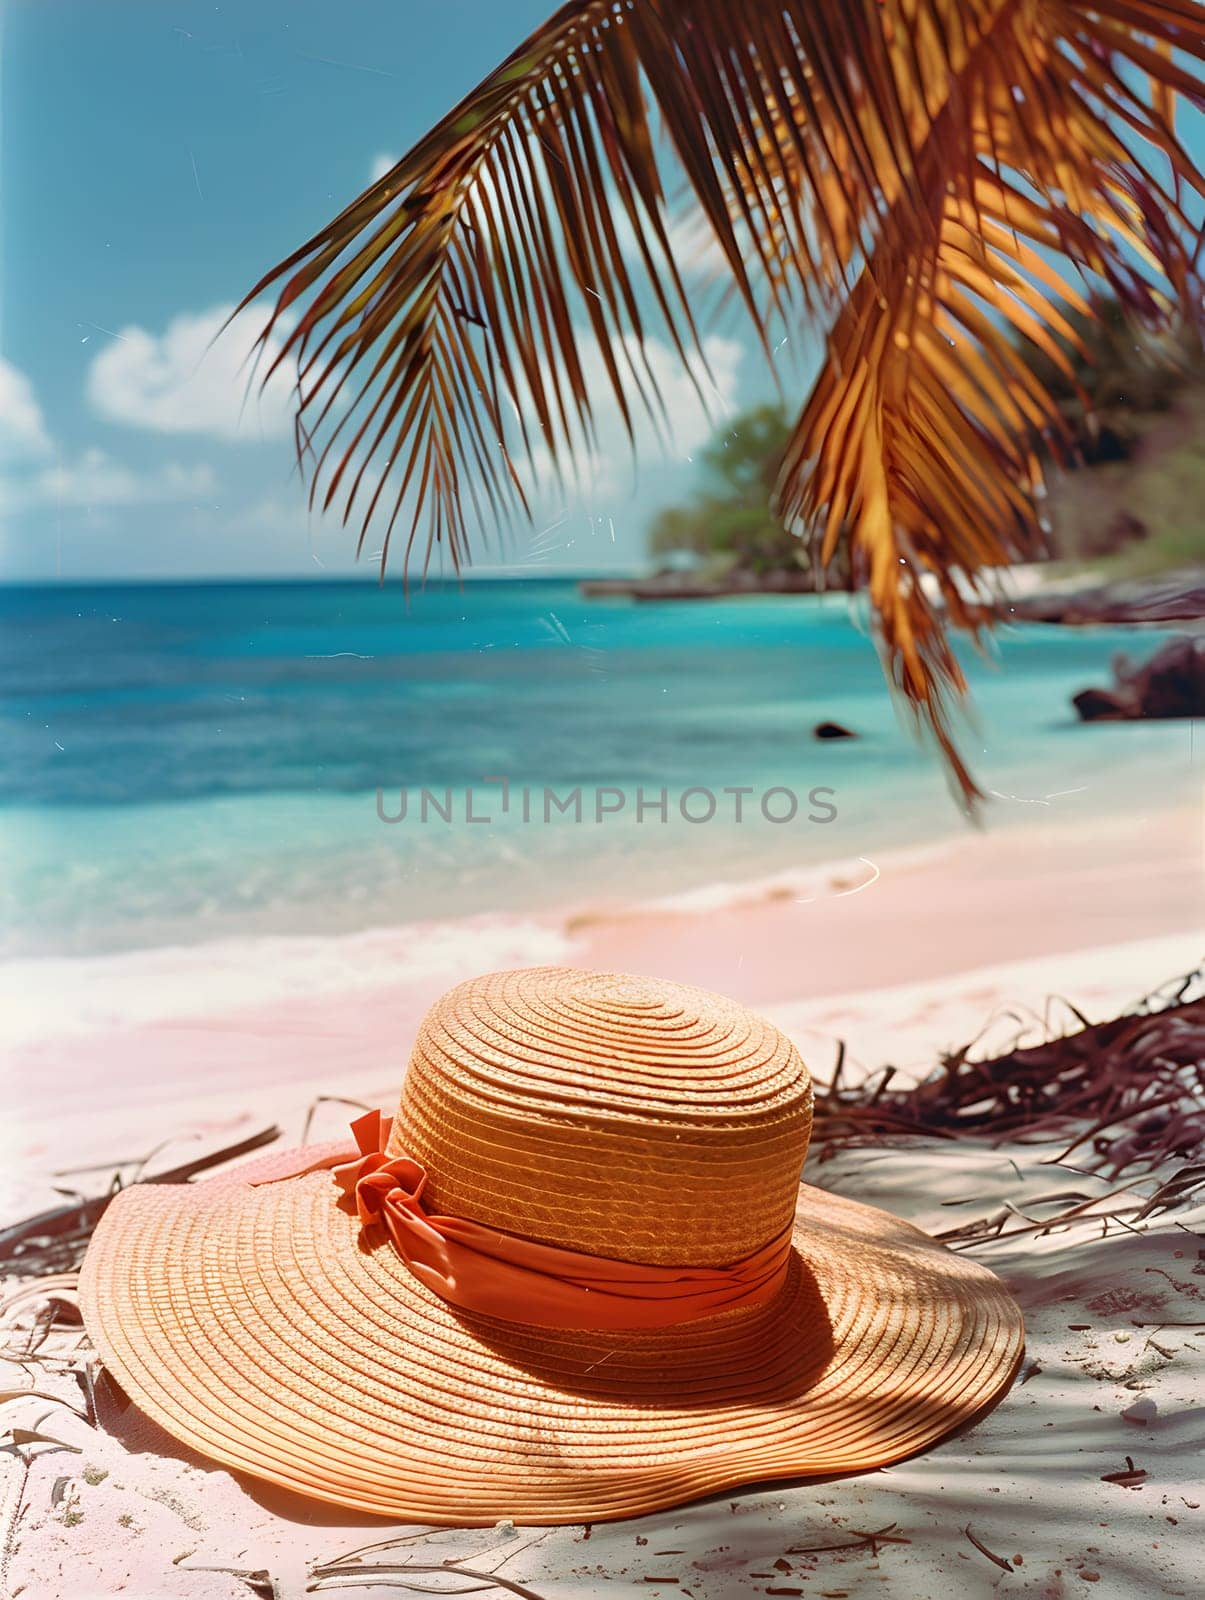 A straw hat rests on the sandy beach, framed by a majestic palm tree reaching towards the sky. The light dances on the water, creating a serene natural landscape perfect for travel and relaxation